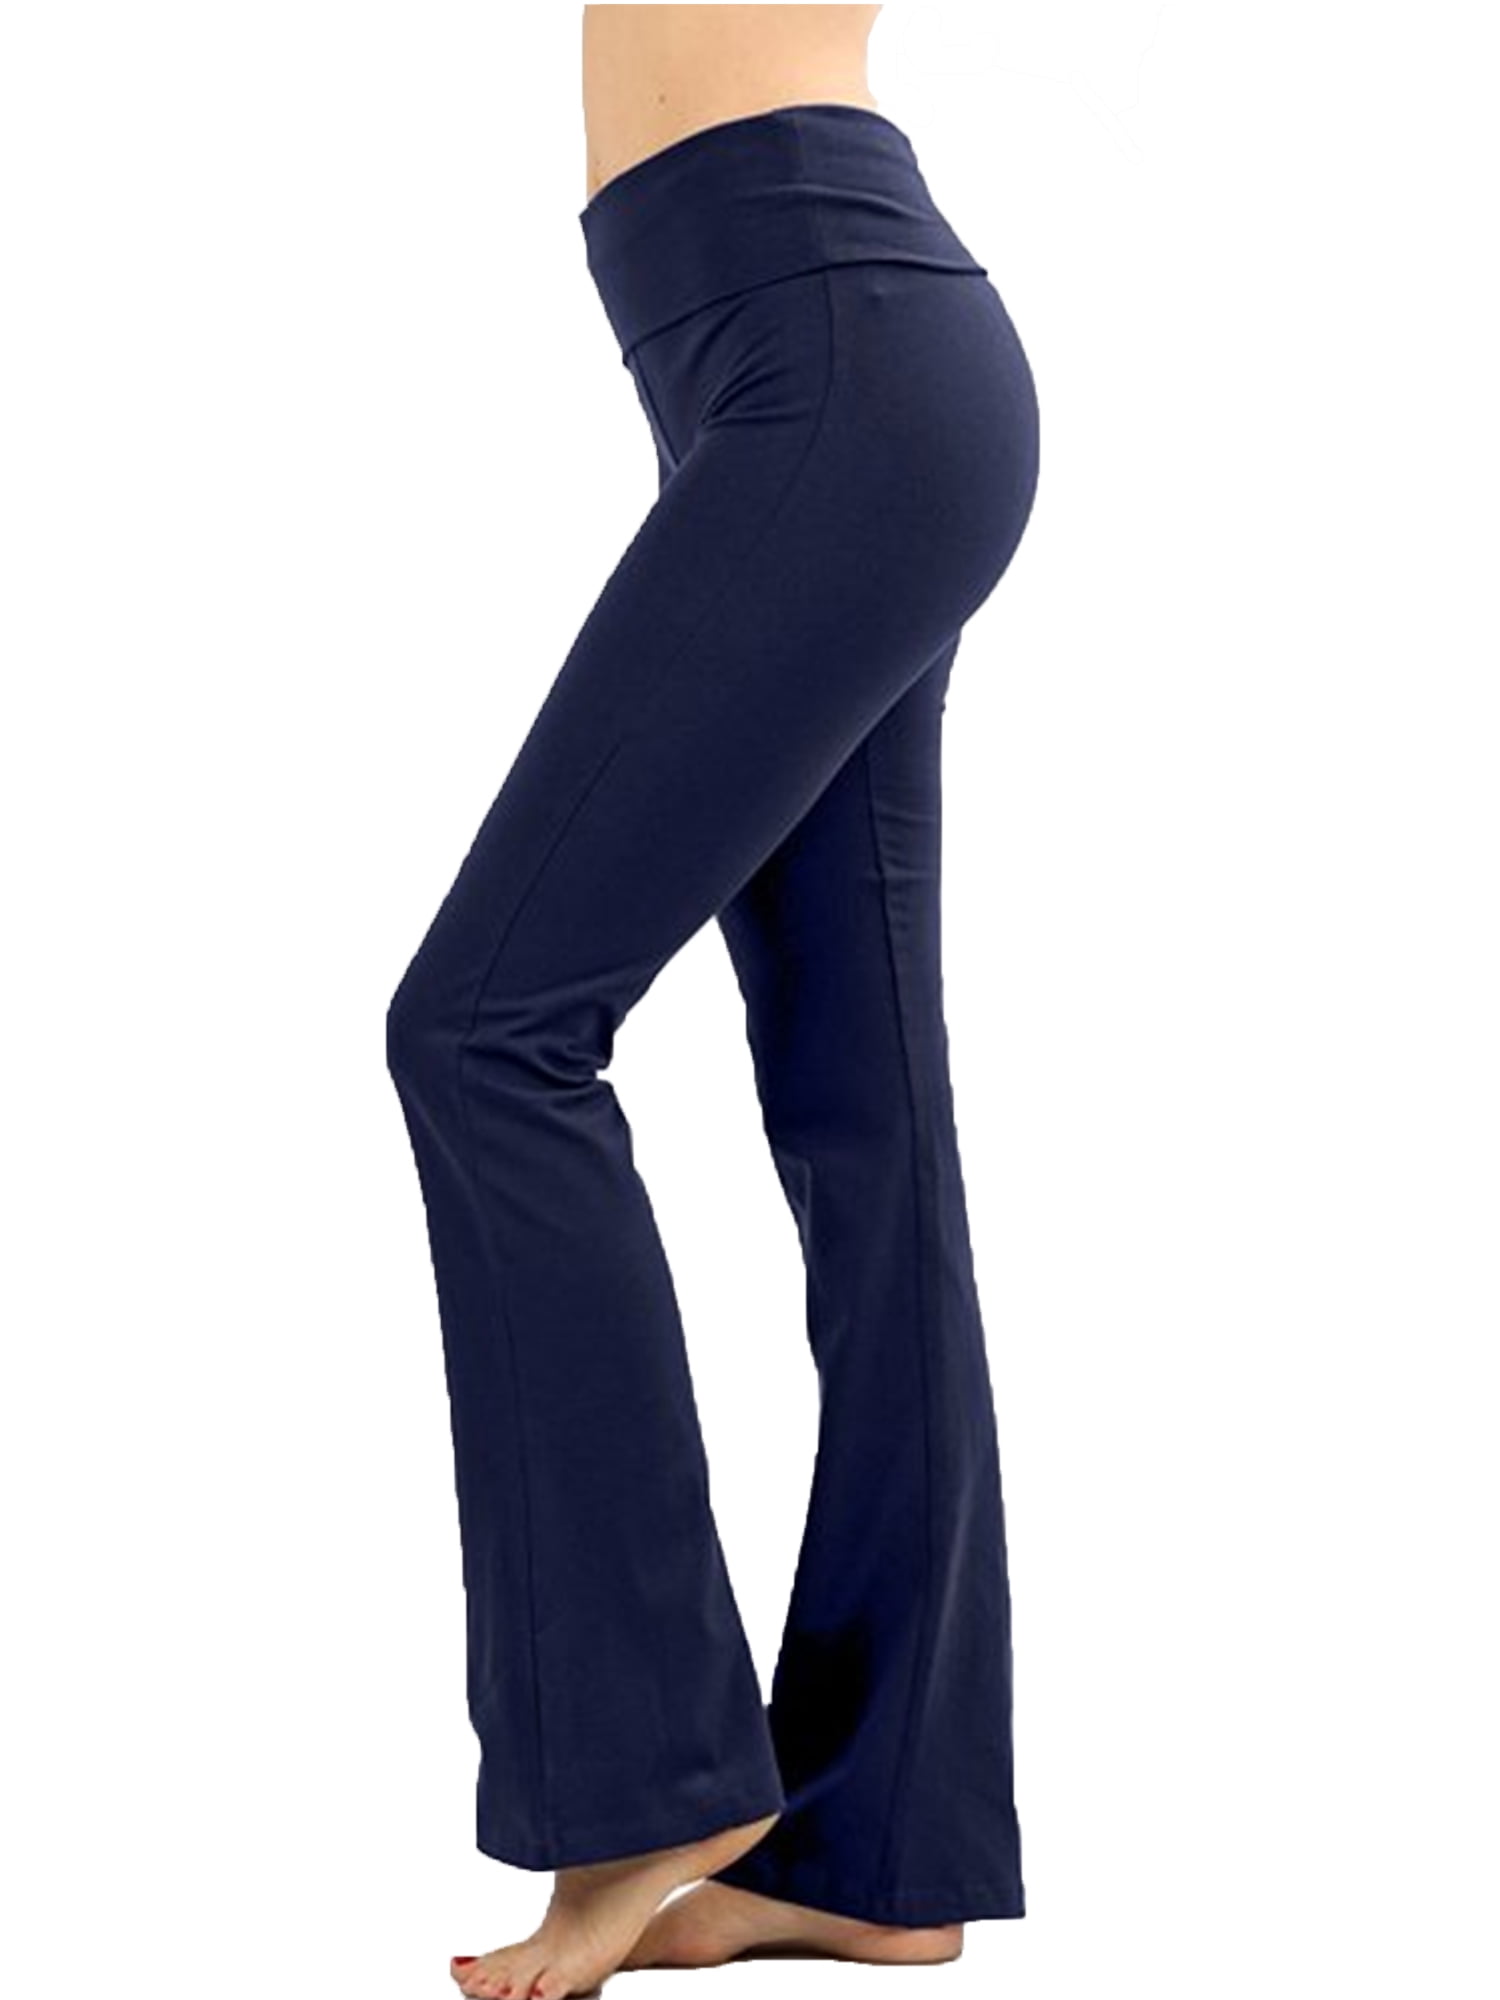 Women Bootcut Yoga Pants Bootleg Flare Trousers Workout Casual Fitness  Running Stretch Jogger Sweat Pants Foldover Waist Workout Yoga Pants 